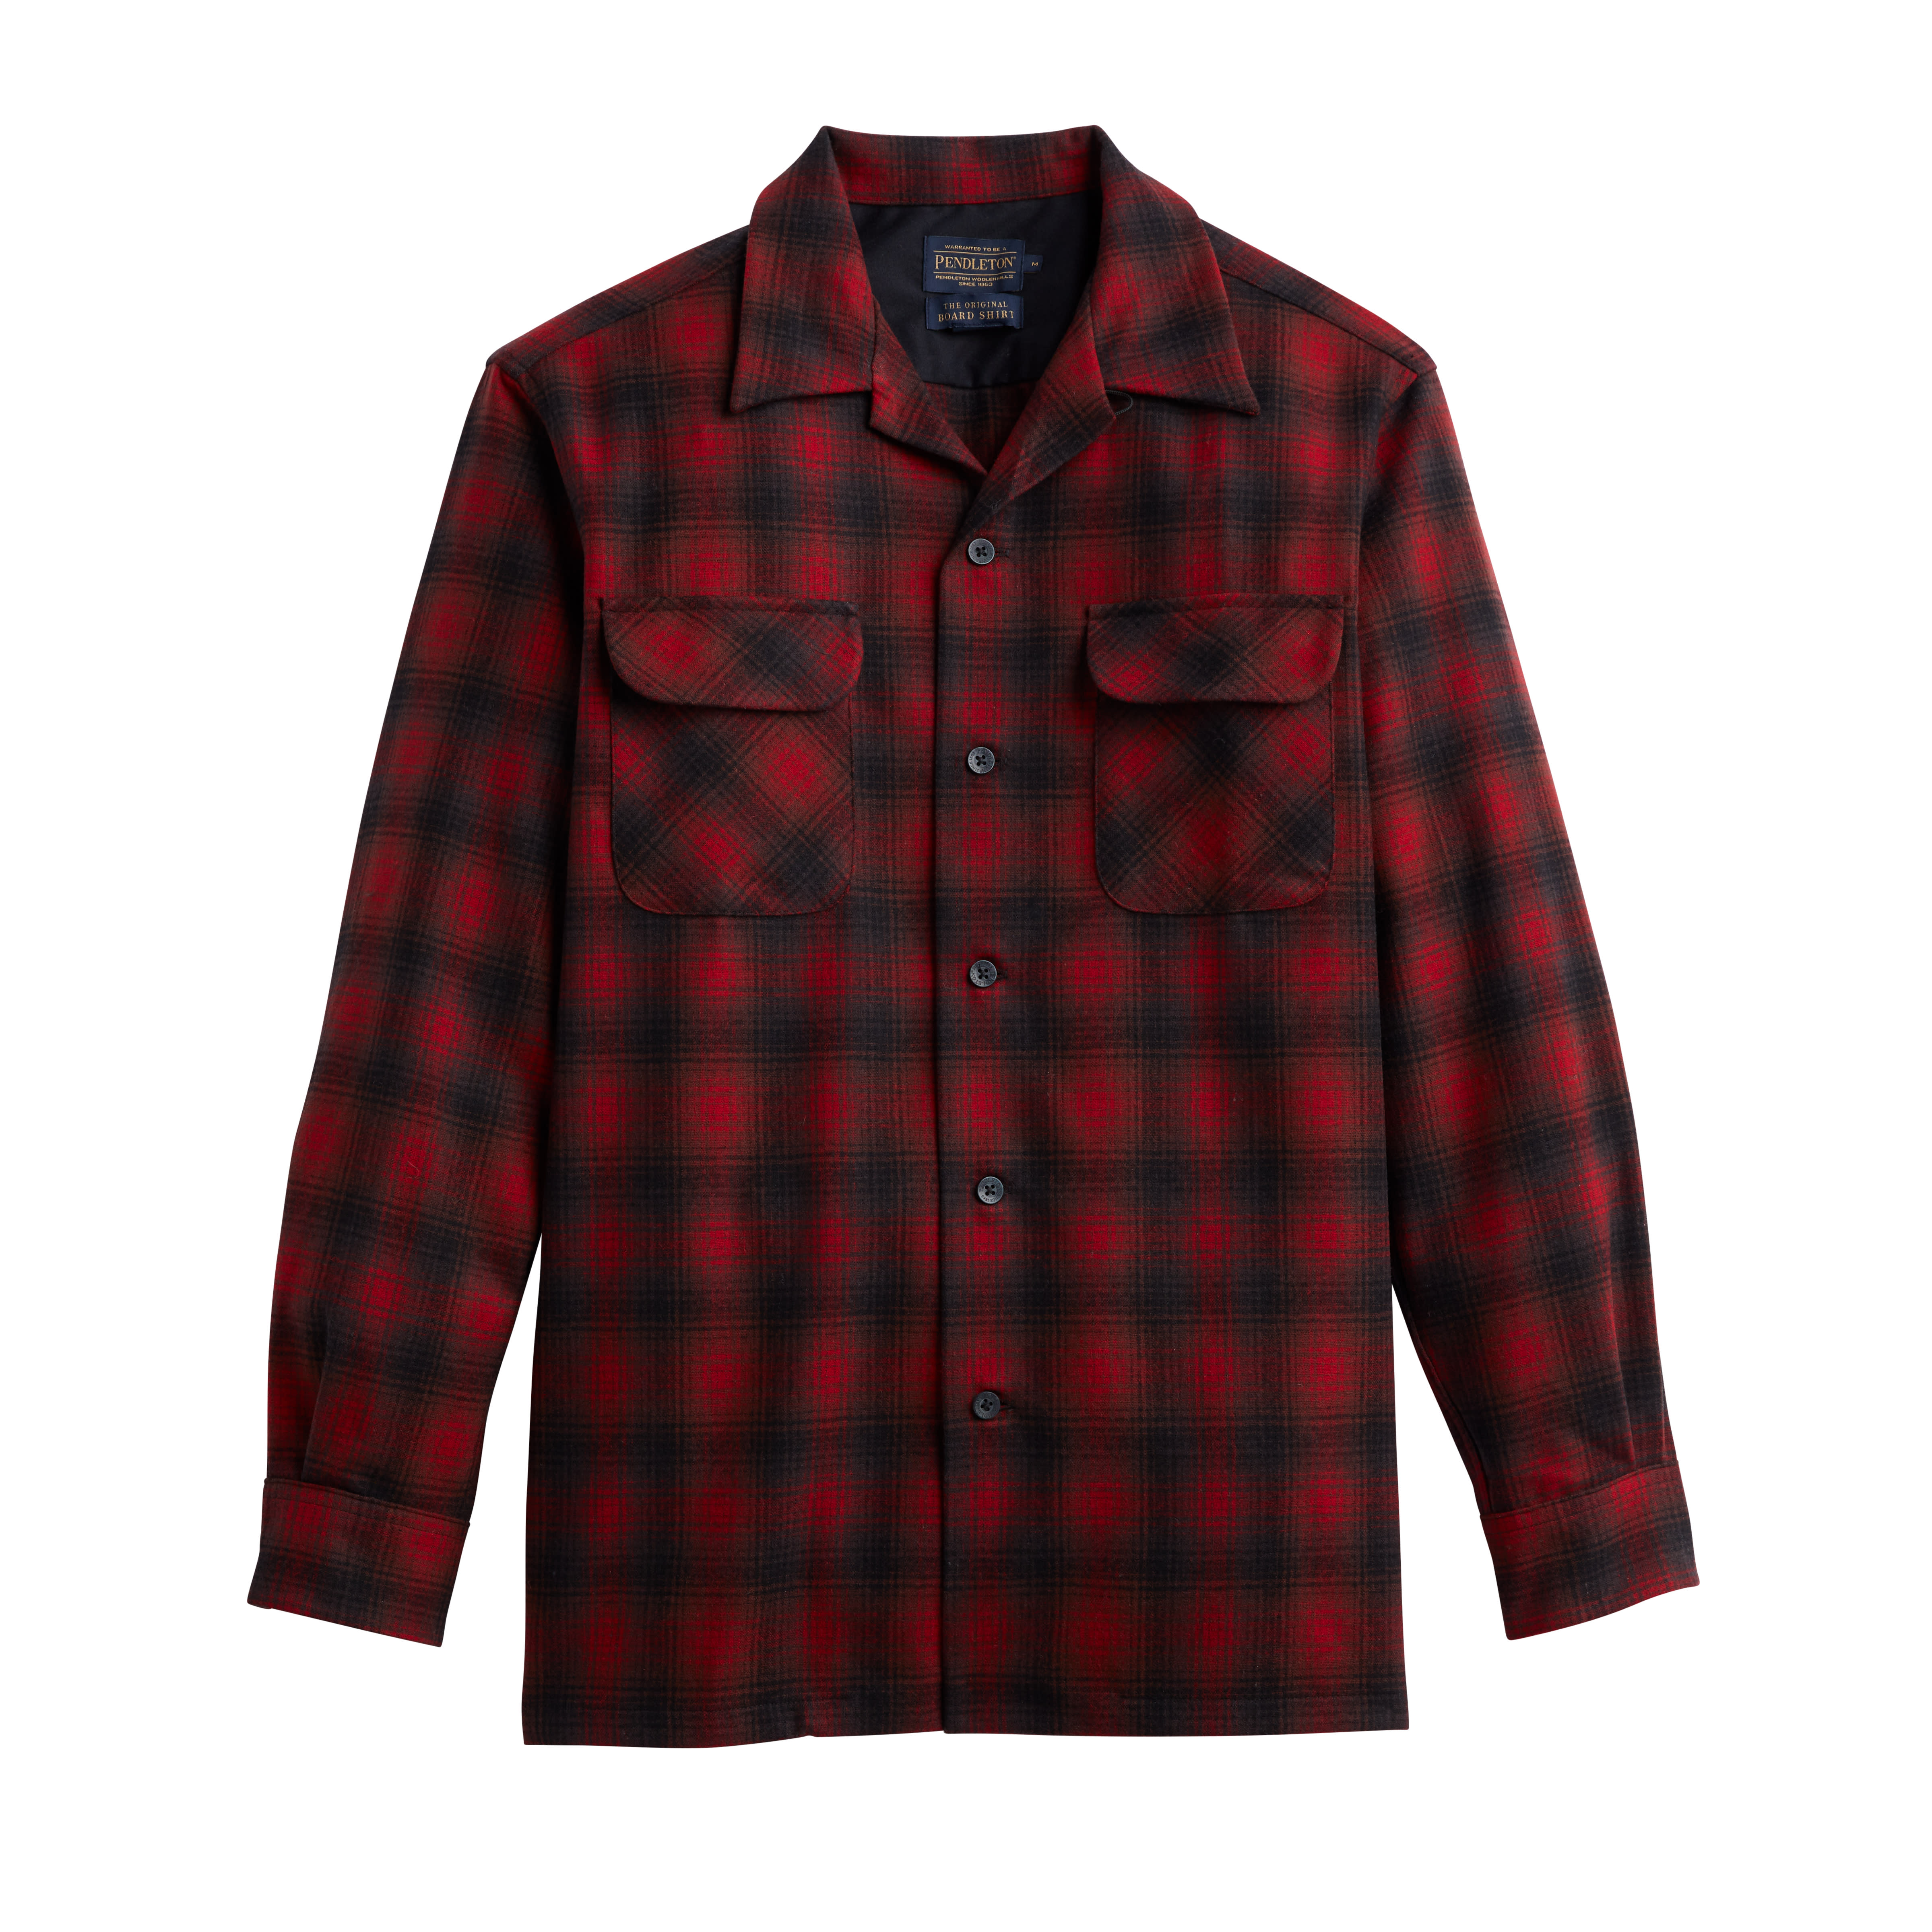 Board Shirt in Red Ombre by Pendleton - Hansen's Clothing